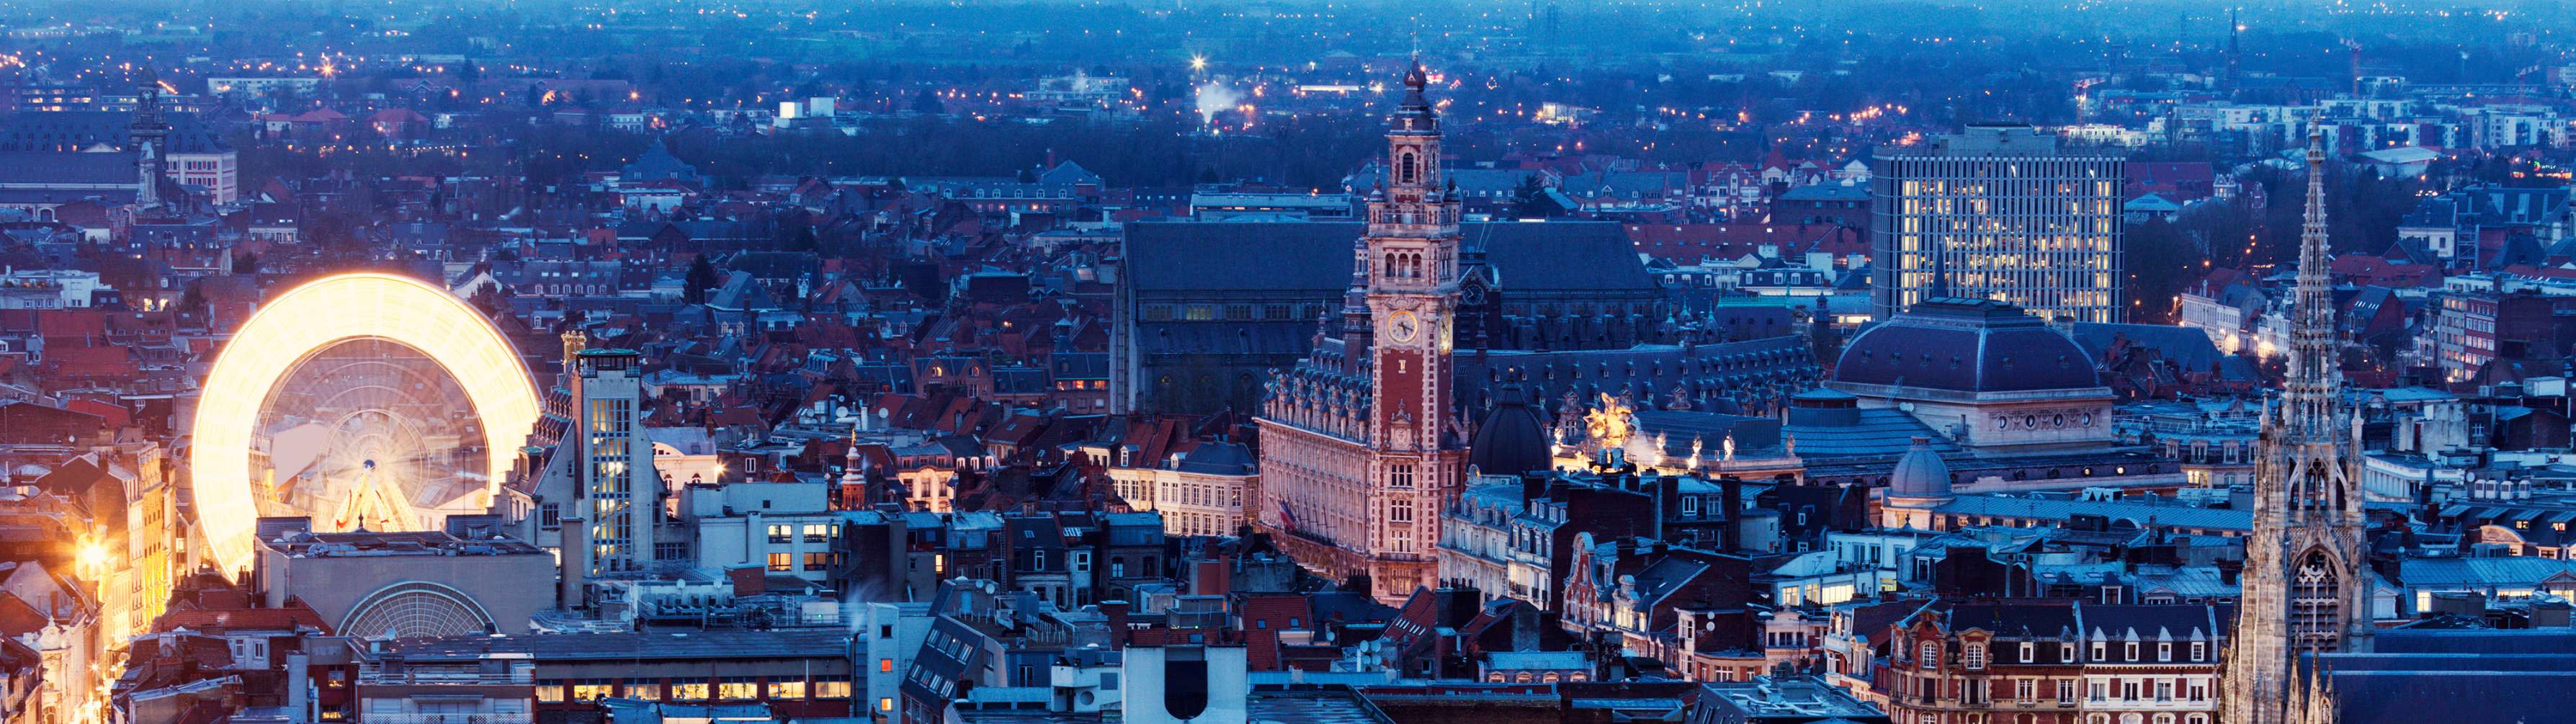 The French city of Lille lit up at night, with street lights and traffic lighting up the sky.